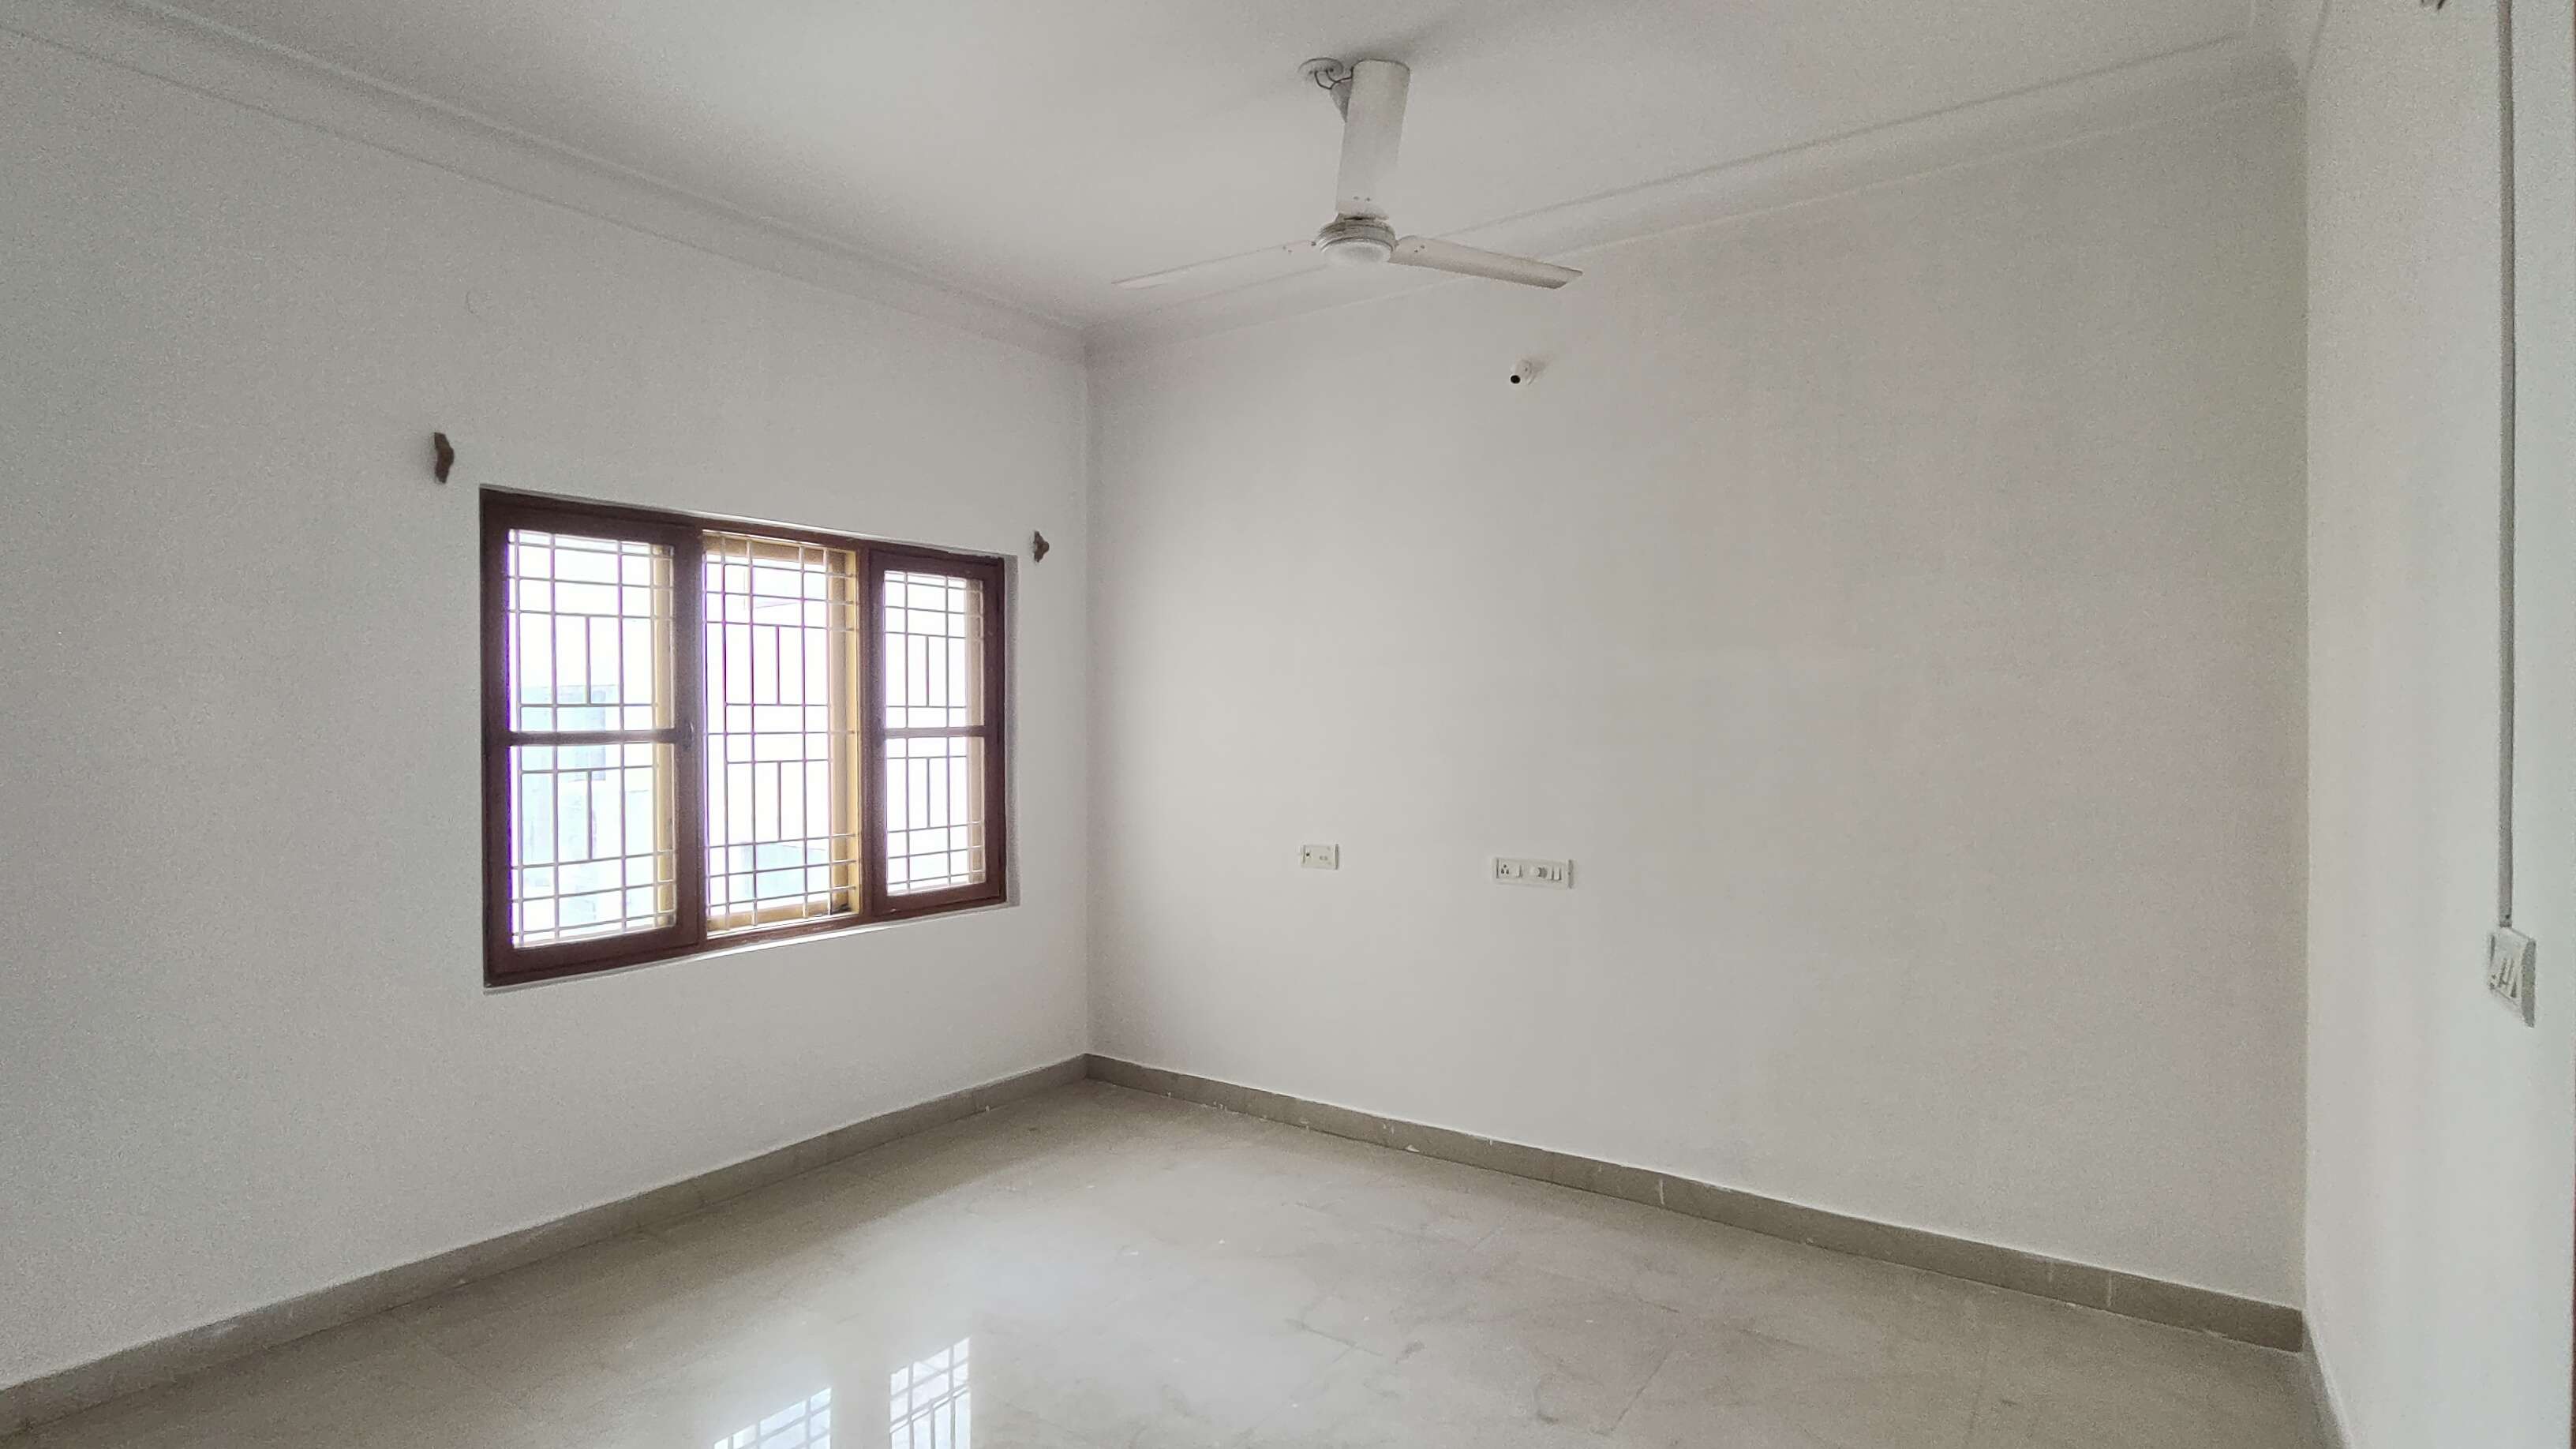 4 BHK Residential House for rent in JayaNagar 3rd Block Bangalore - 3200  Sq-ft - 1350 Sq-ft - 53104096 on